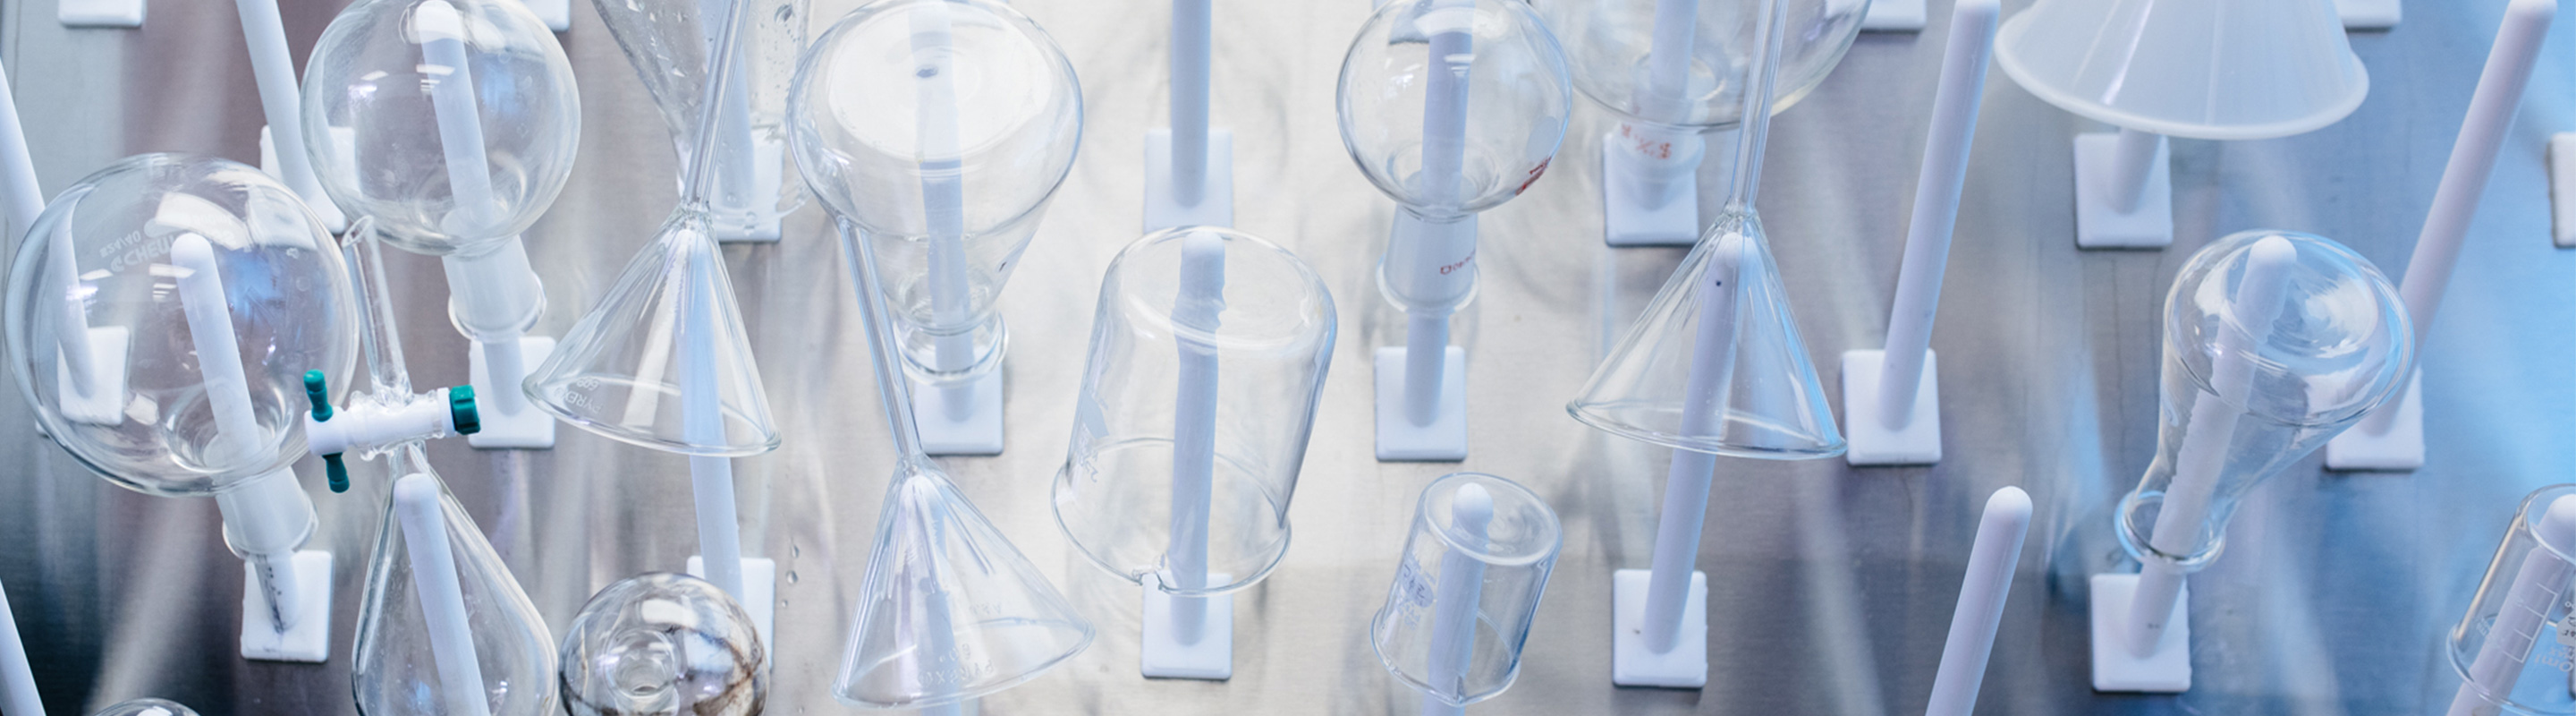 beakers on a drying rack in a lab